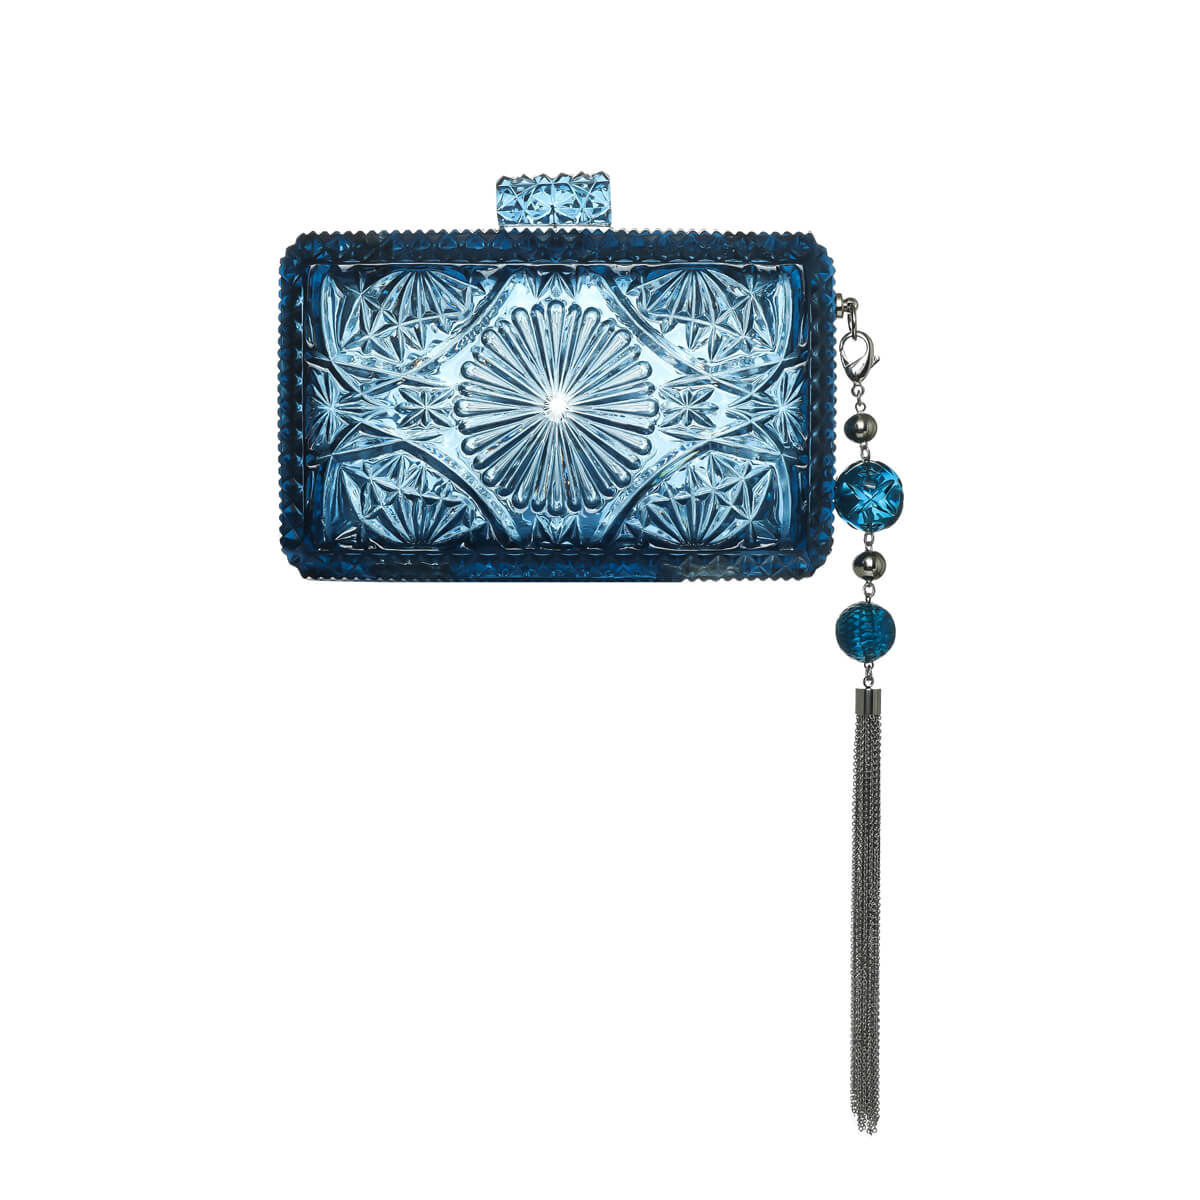 Hand Carved Rectangle Clutch Classic Blue